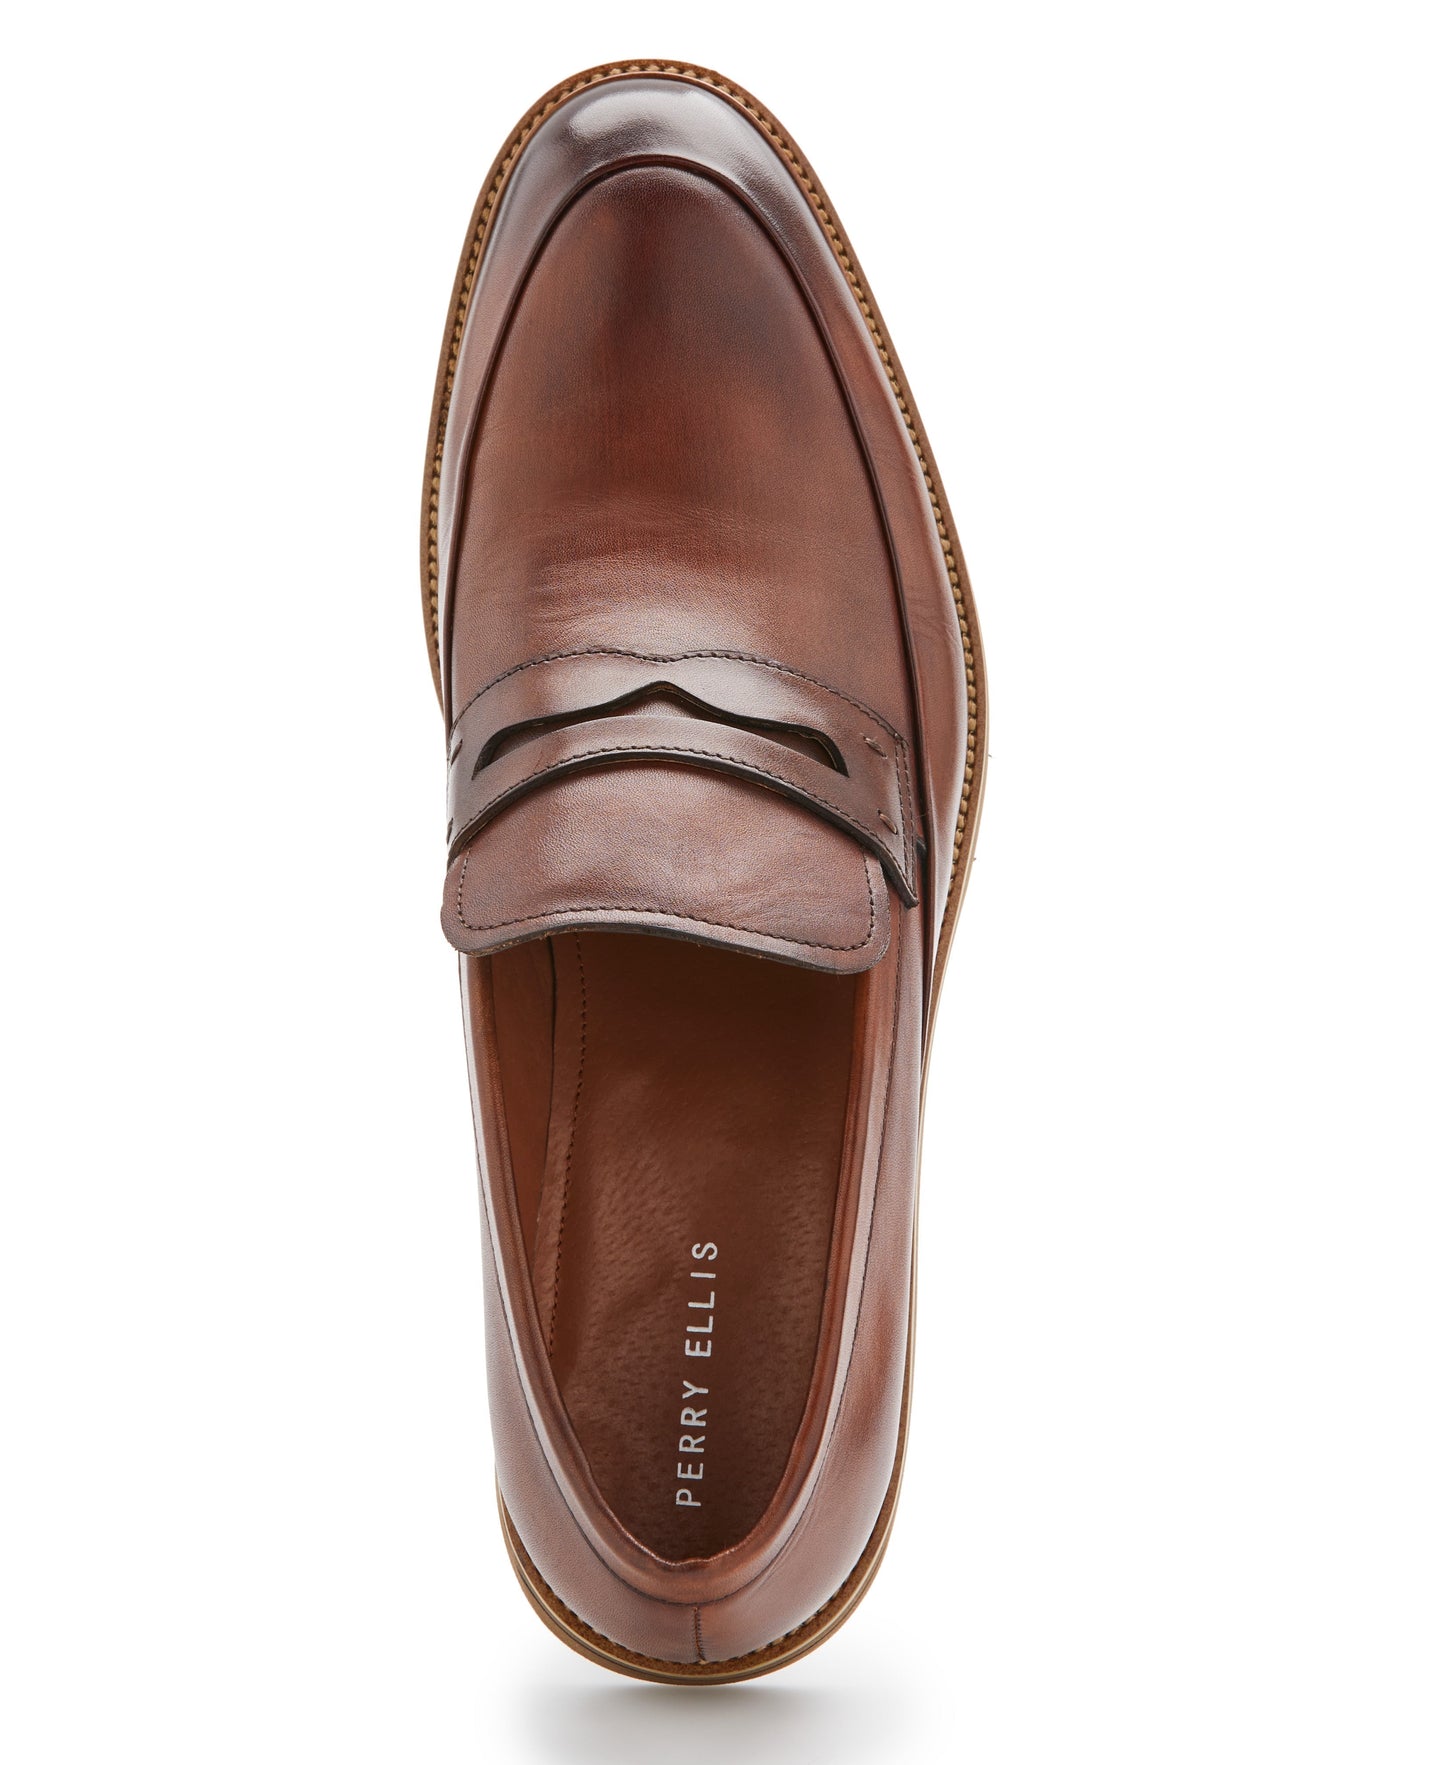 Genuine Leather Contrast Penny Loafers